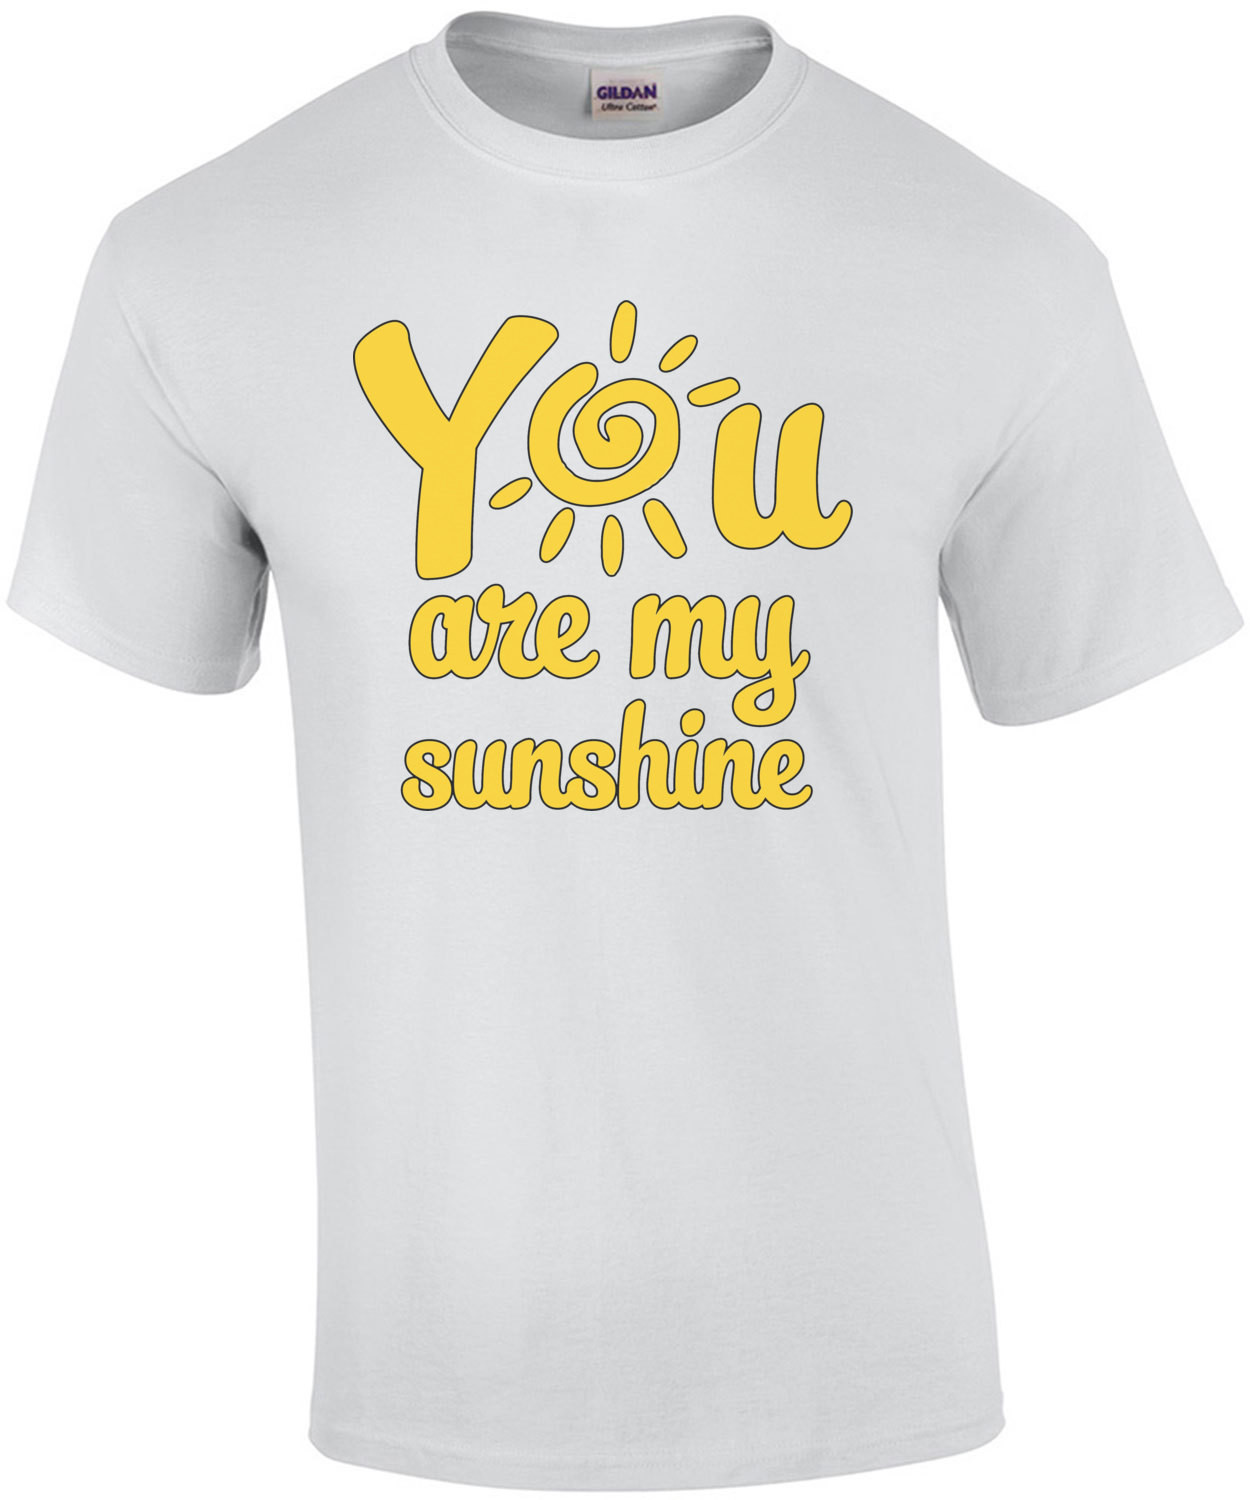 You are my sunshine - Cute Funny Mother and Daughter/Son T-Shirt 